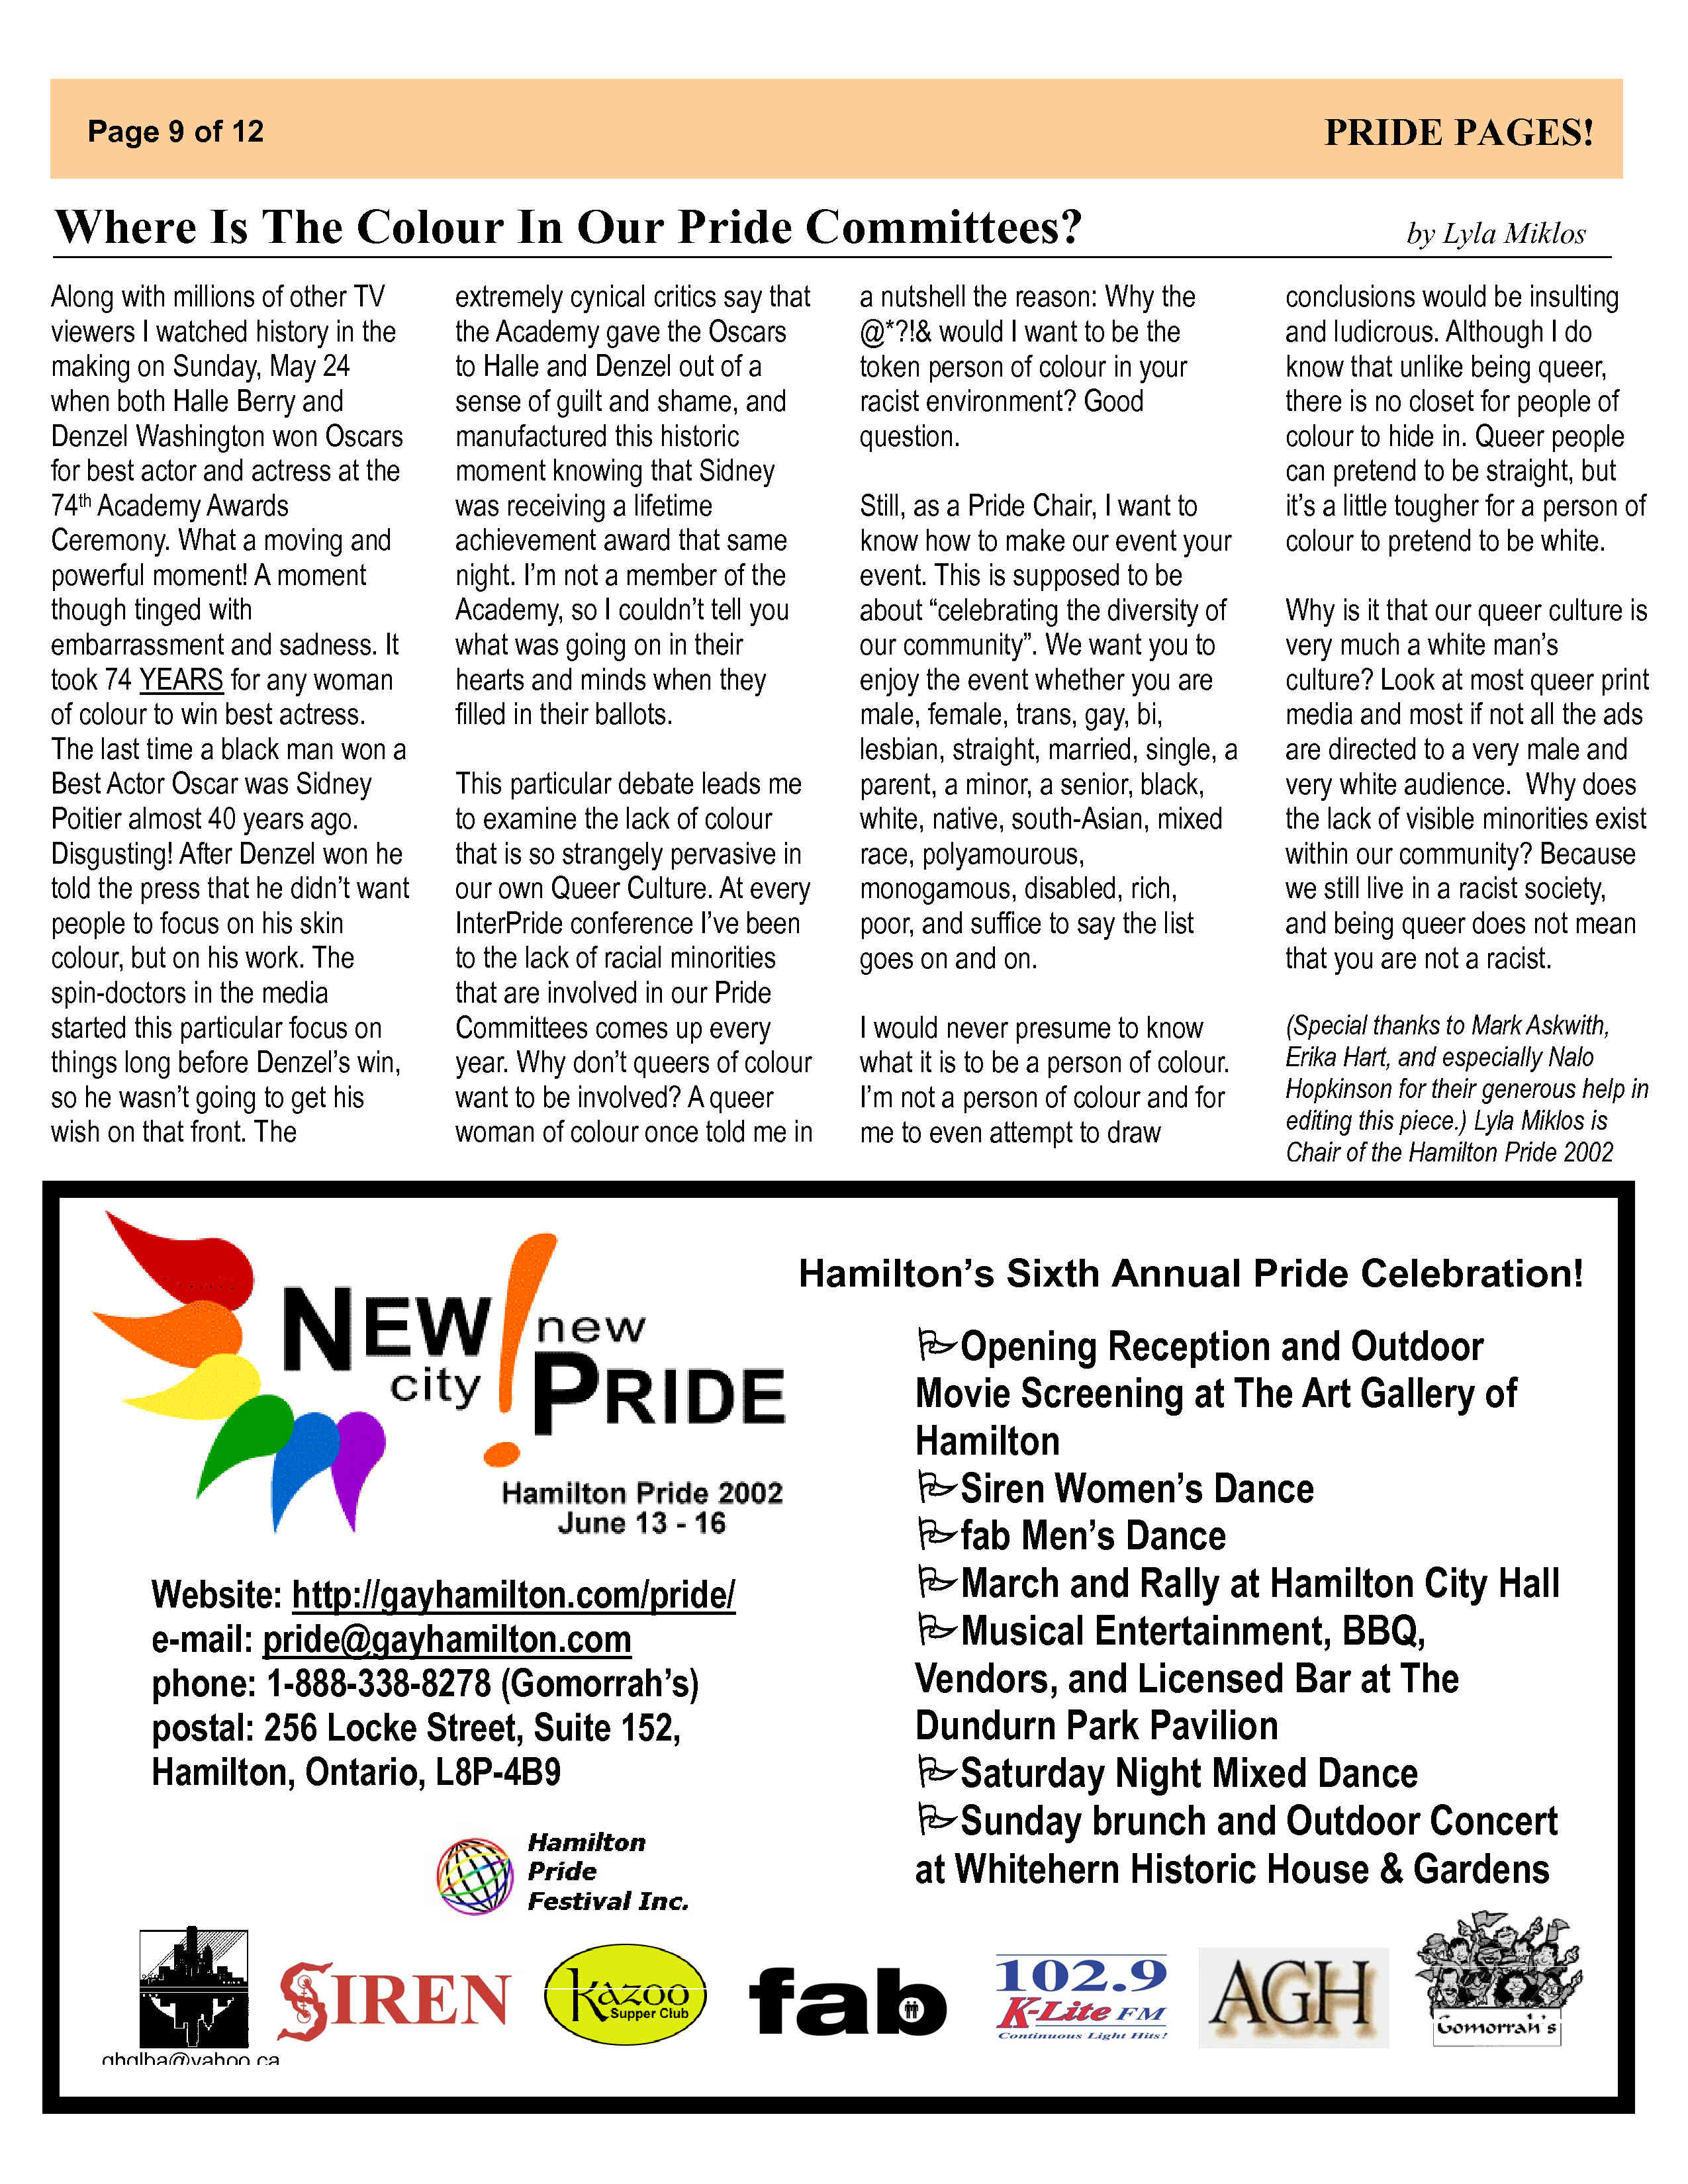 Pride Pages 2002-04 p9